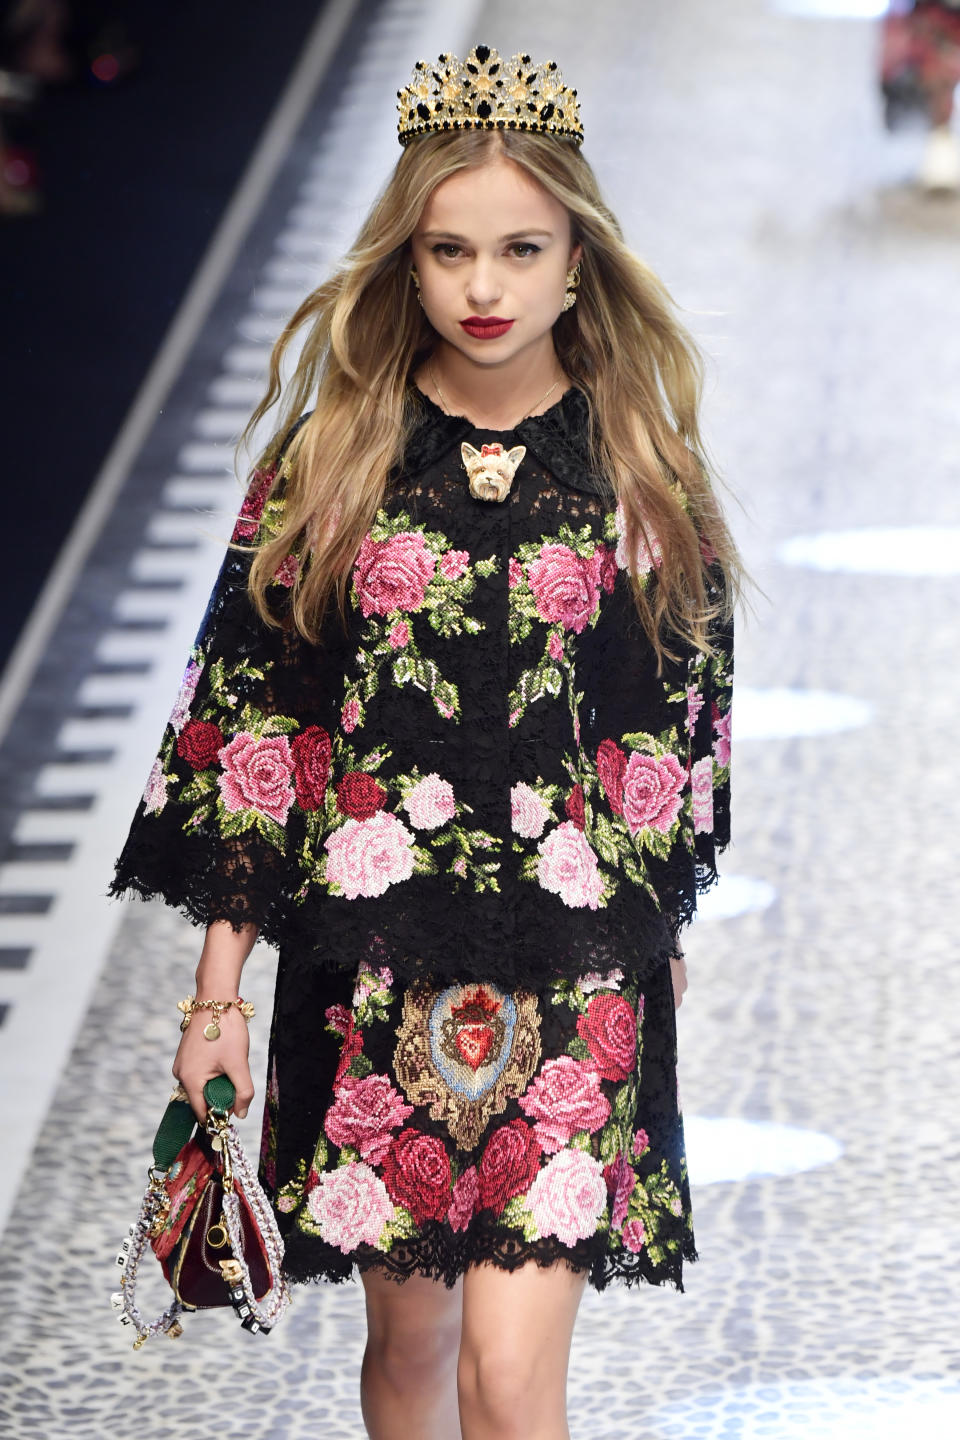 In one of her first jobs in 2017, Lady Amelia posed with a nod to her Royal roots wearing a crown at the Dolce & Gabbana show during Milan Fashion. (Getty Images)